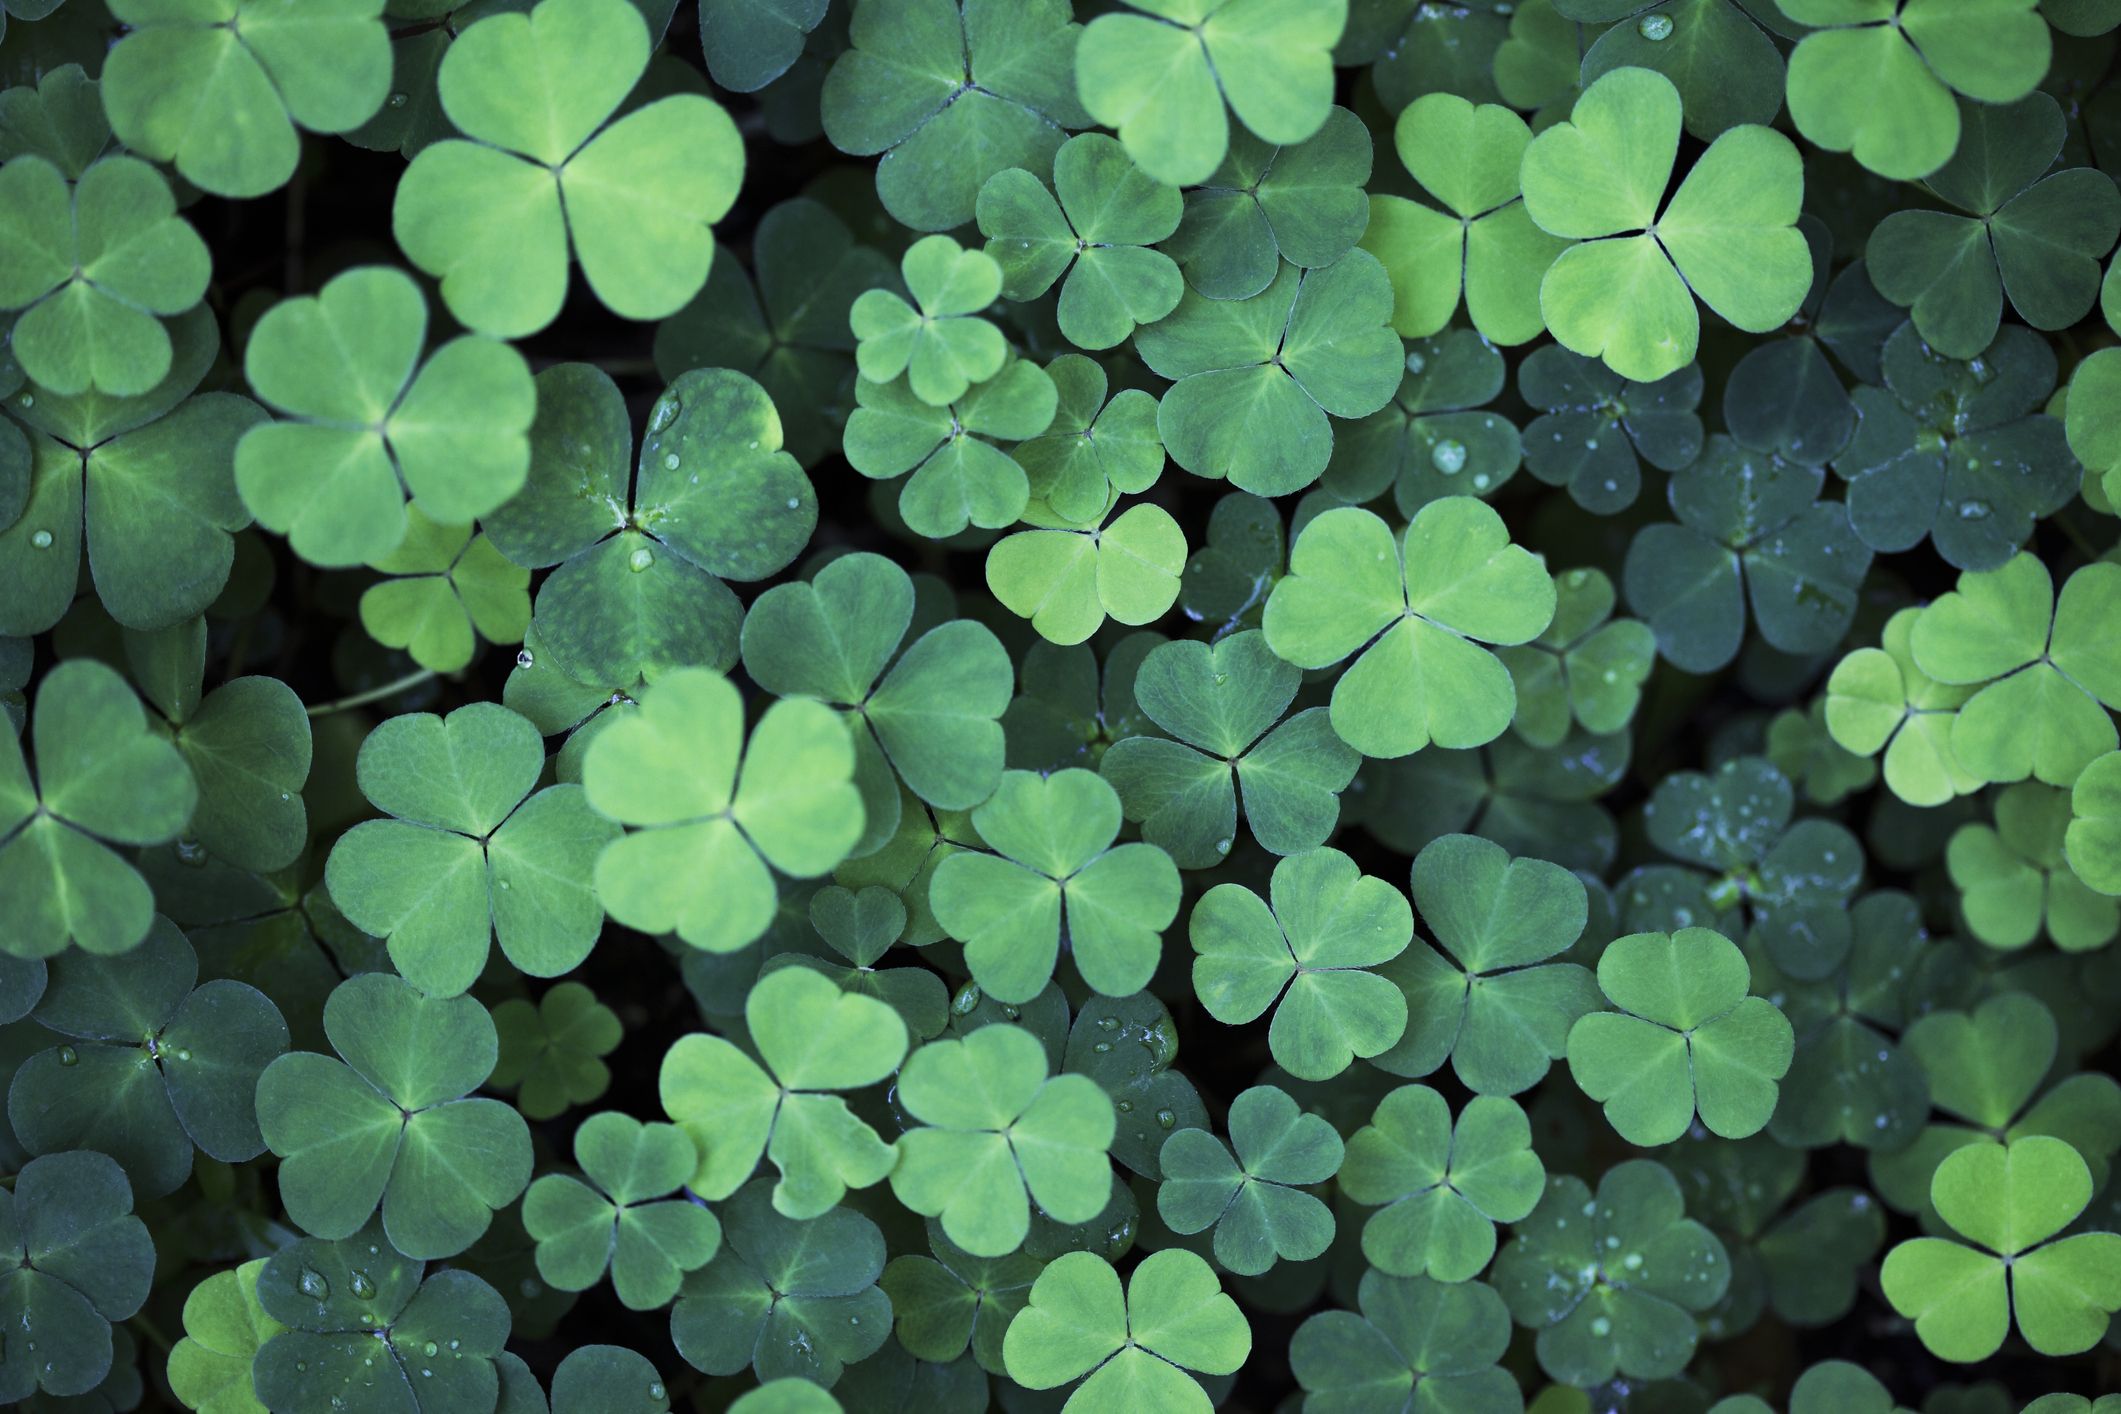 St. Patrick's Day Quotes for Luck and Prosperity - Updated! With